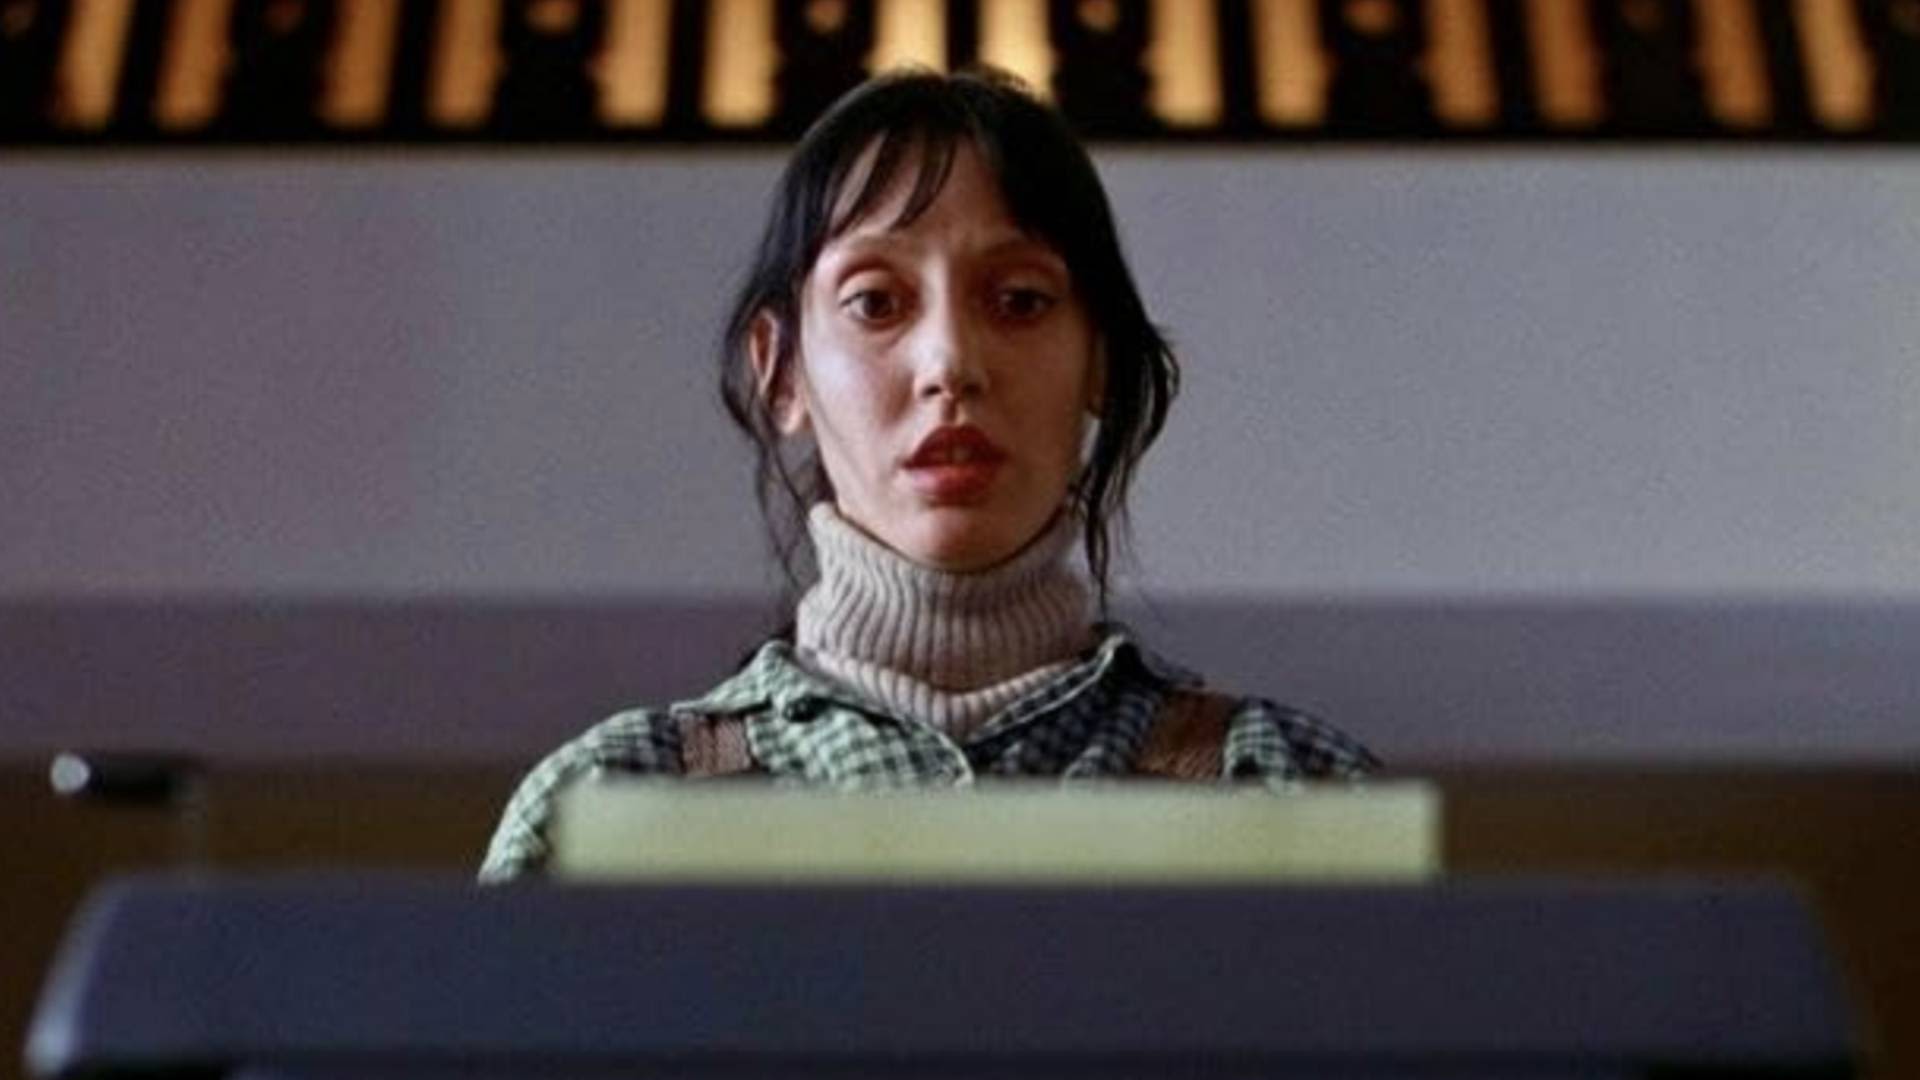 Stephen King pays tribute to Shelley Duvall, calling The Shining star a "wonderful, talented, underused actor"